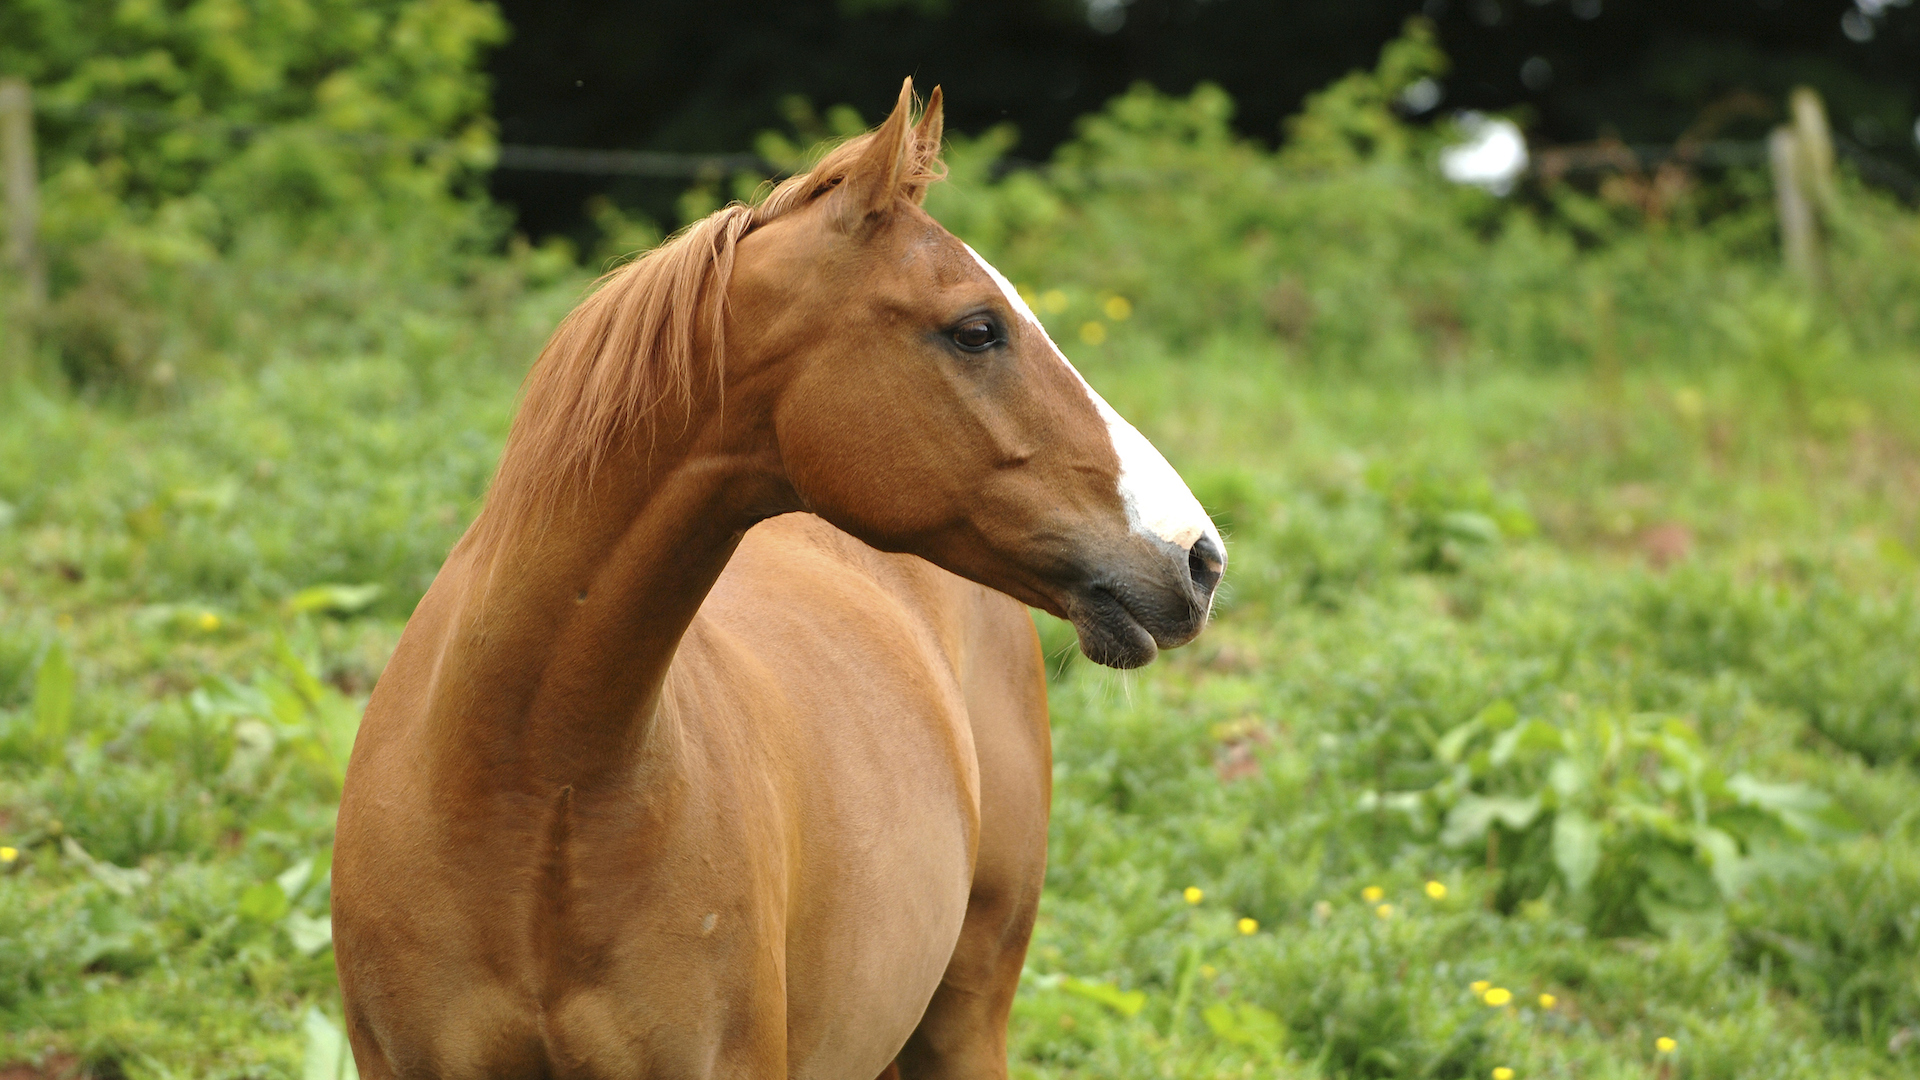 A photograph of an Arab horse in a grassy field